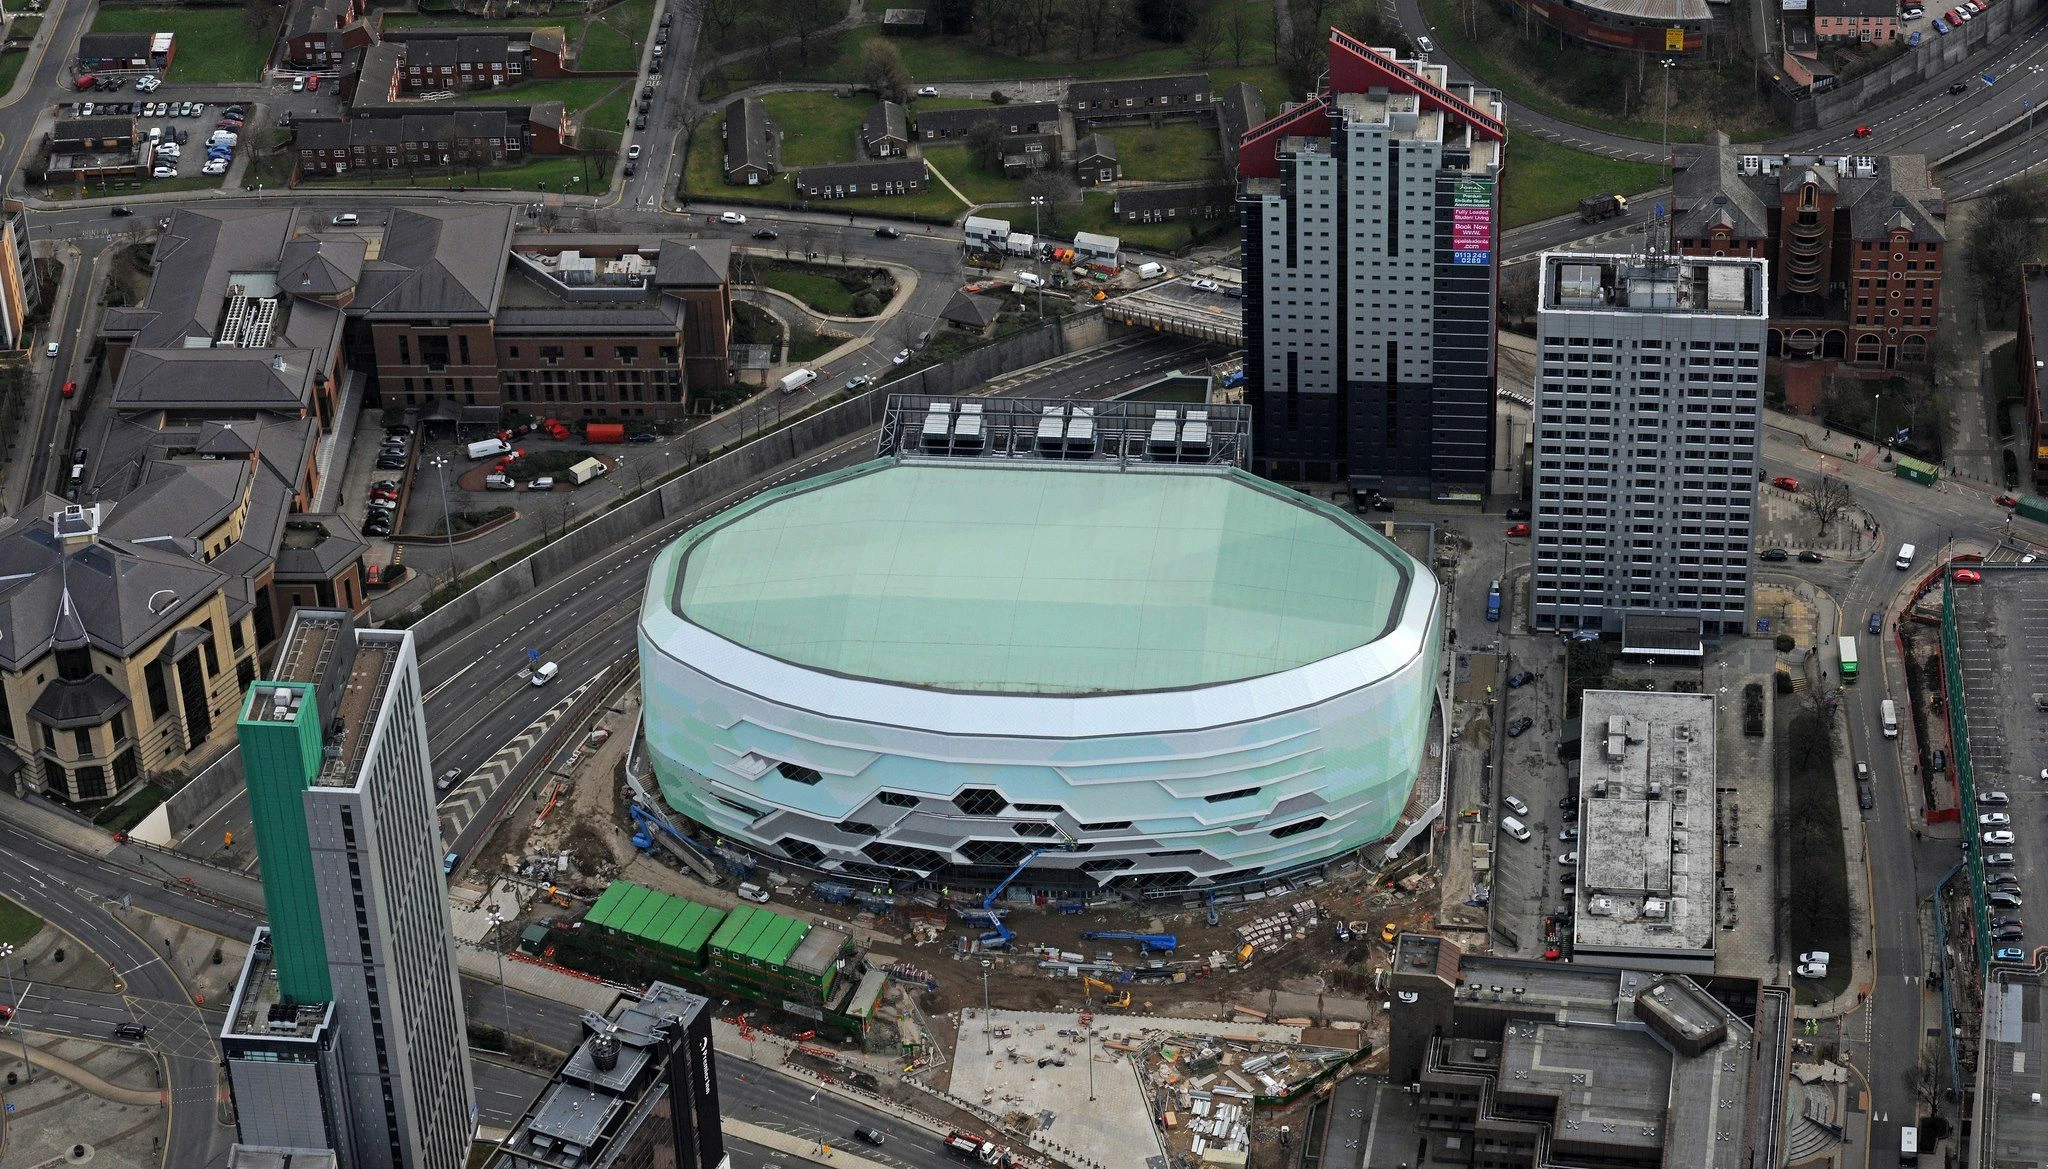 Reflex Systems has worked on the First Direct (Leeds) Arena